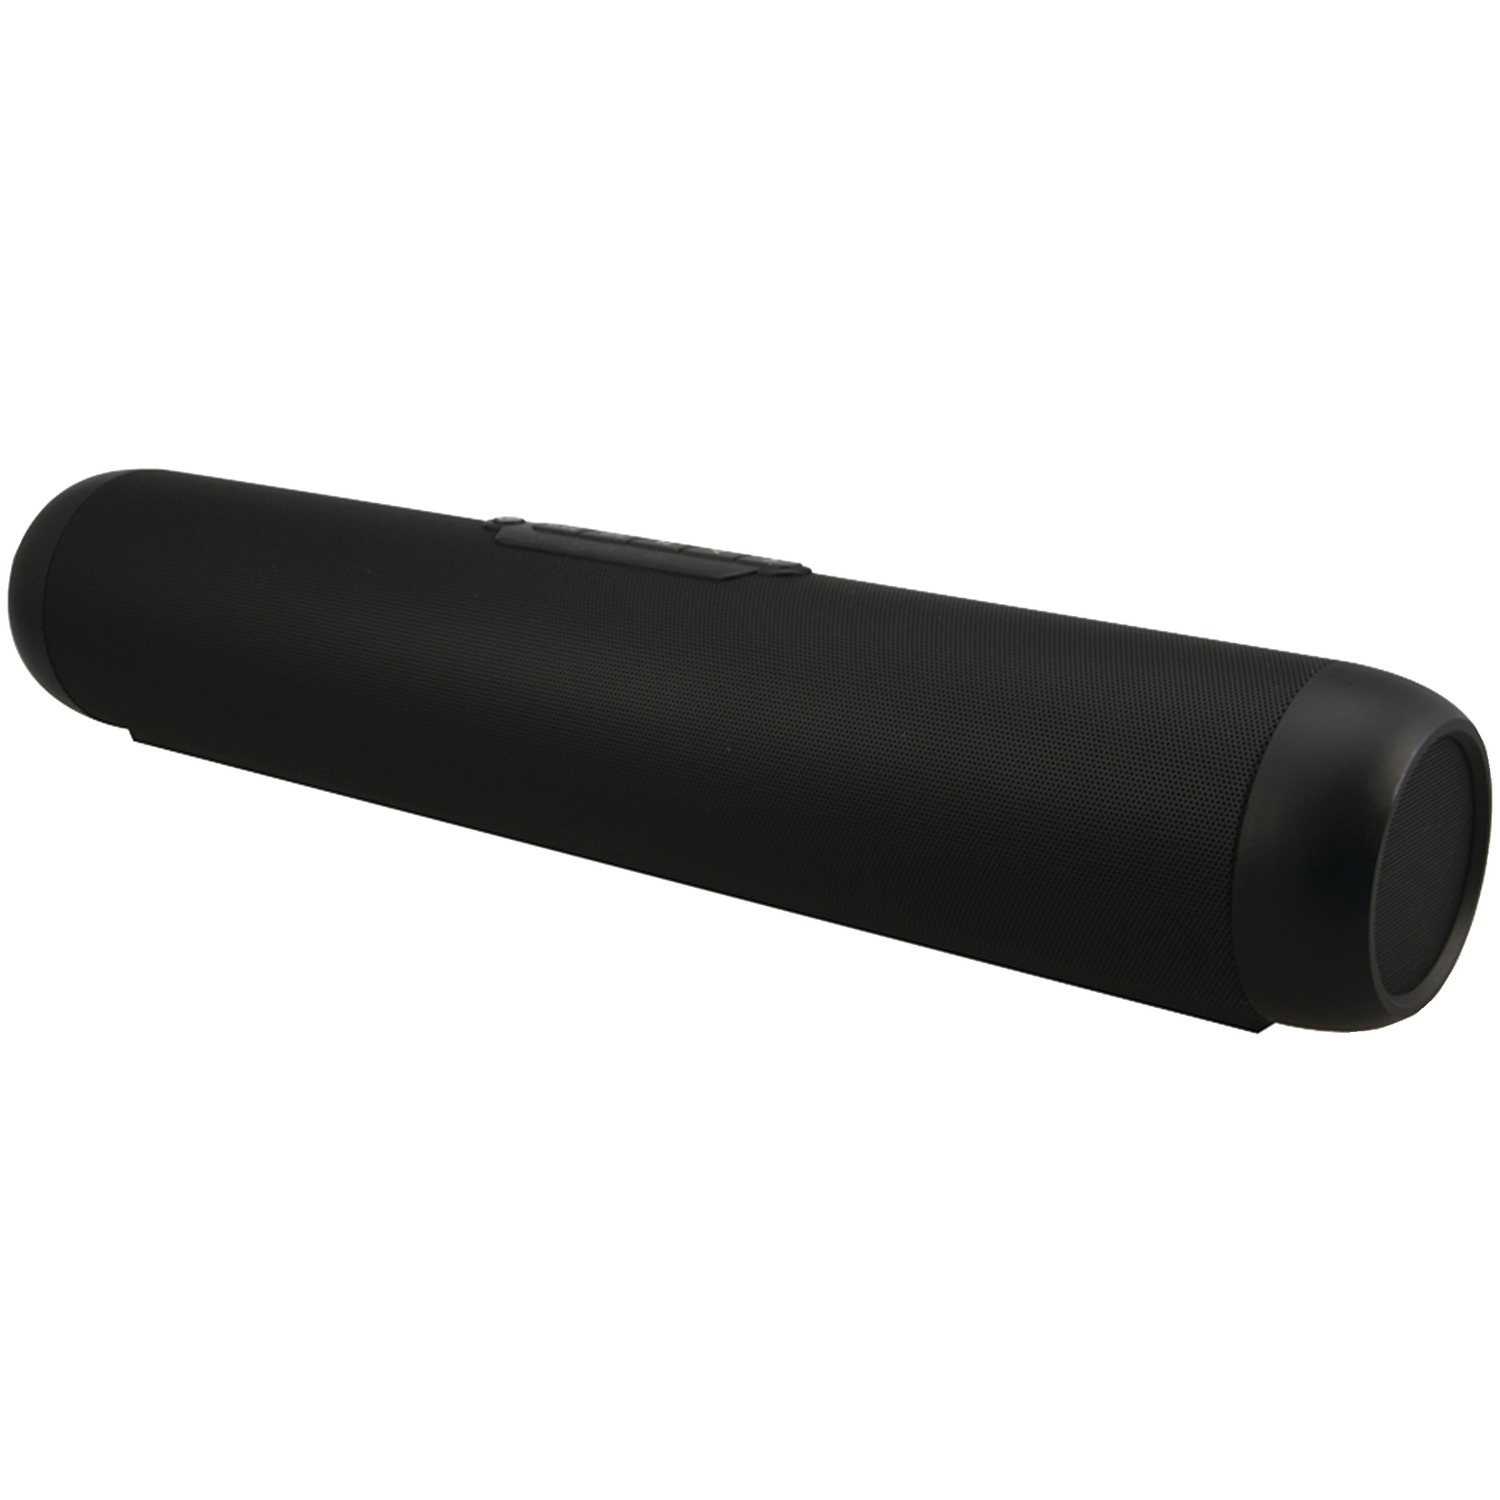 iLive Wi-Fi Speaker Bar with Bluetooth, Multi-room compatible, ISWF776B, Black - image 1 of 4